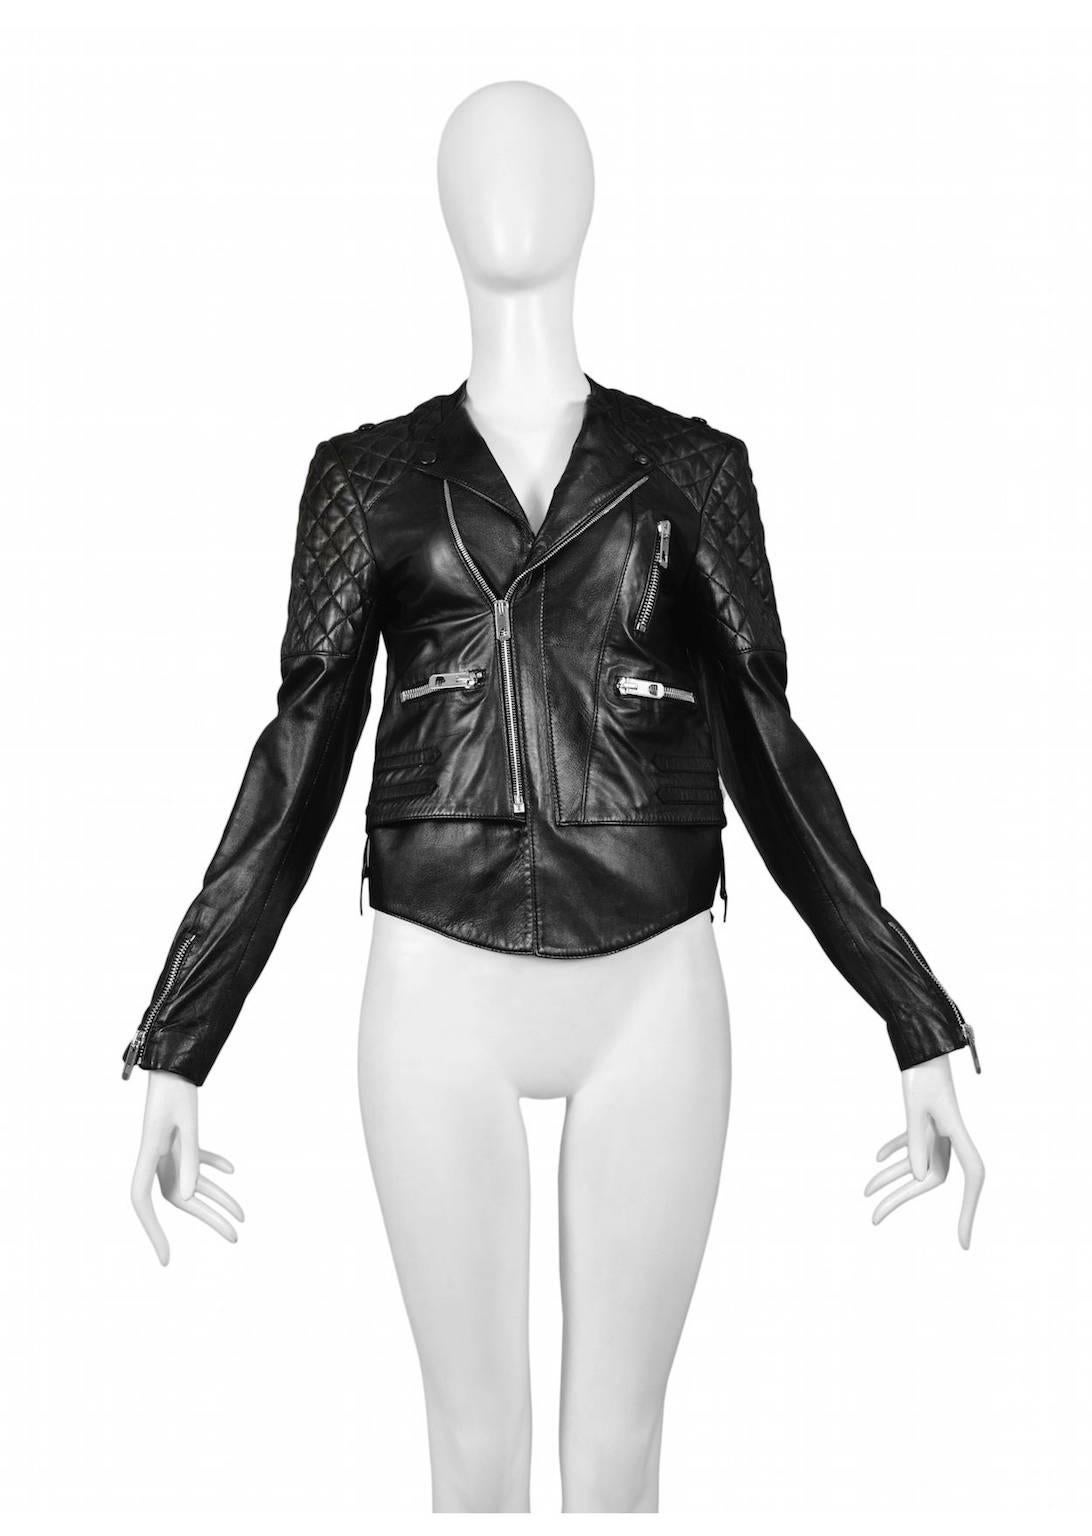 Vintage Nicolas Ghesquière for Balenciaga black leather motorcycle jacket featuring quilting at the shoulders and zipper pockets at either side.